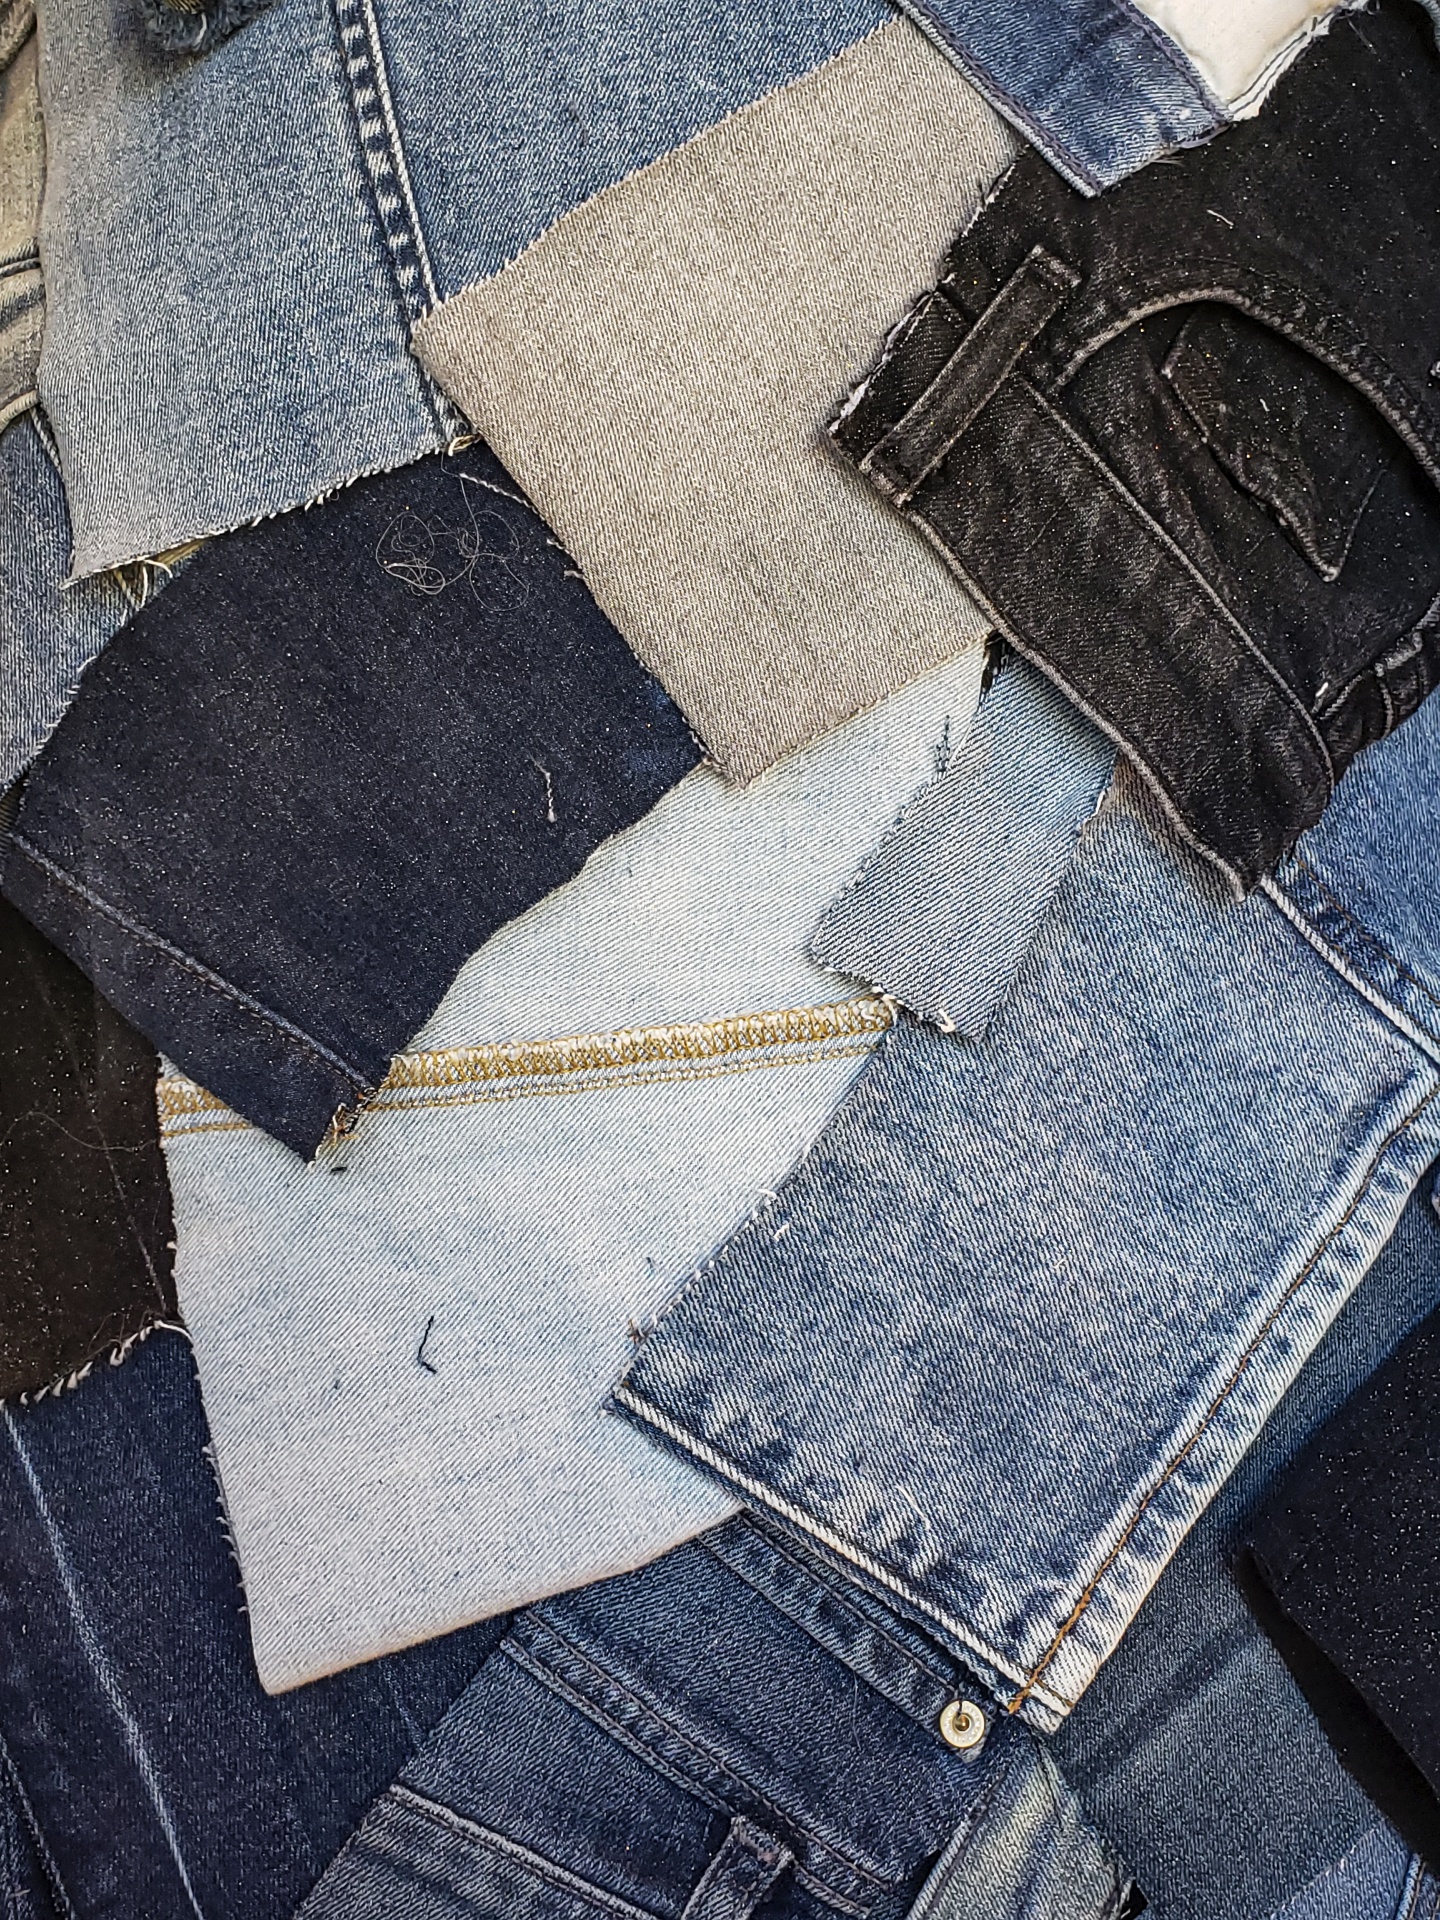 Blue Jeans Background Free Stock Photo - Public Domain Pictures